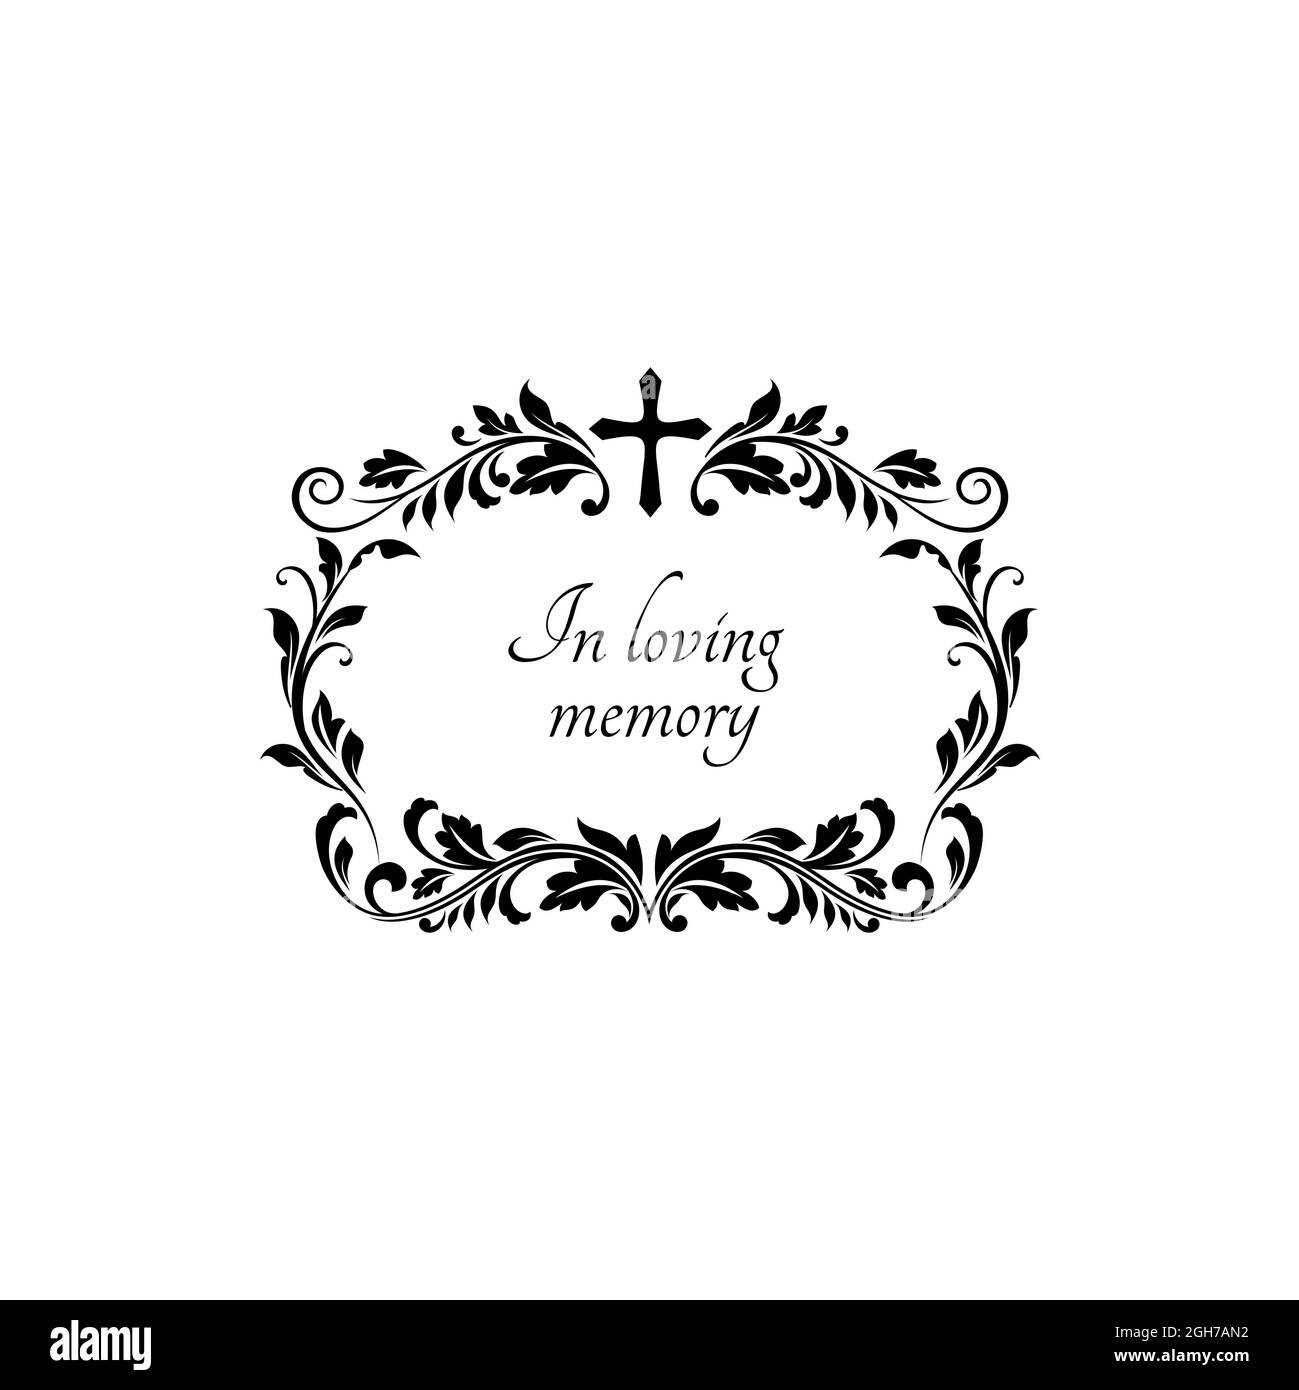 In loving memory inscription on tombstone, floral border frame with vintage flowers isolated black ornamental border. Vector floral ornament and cruci Stock Vector